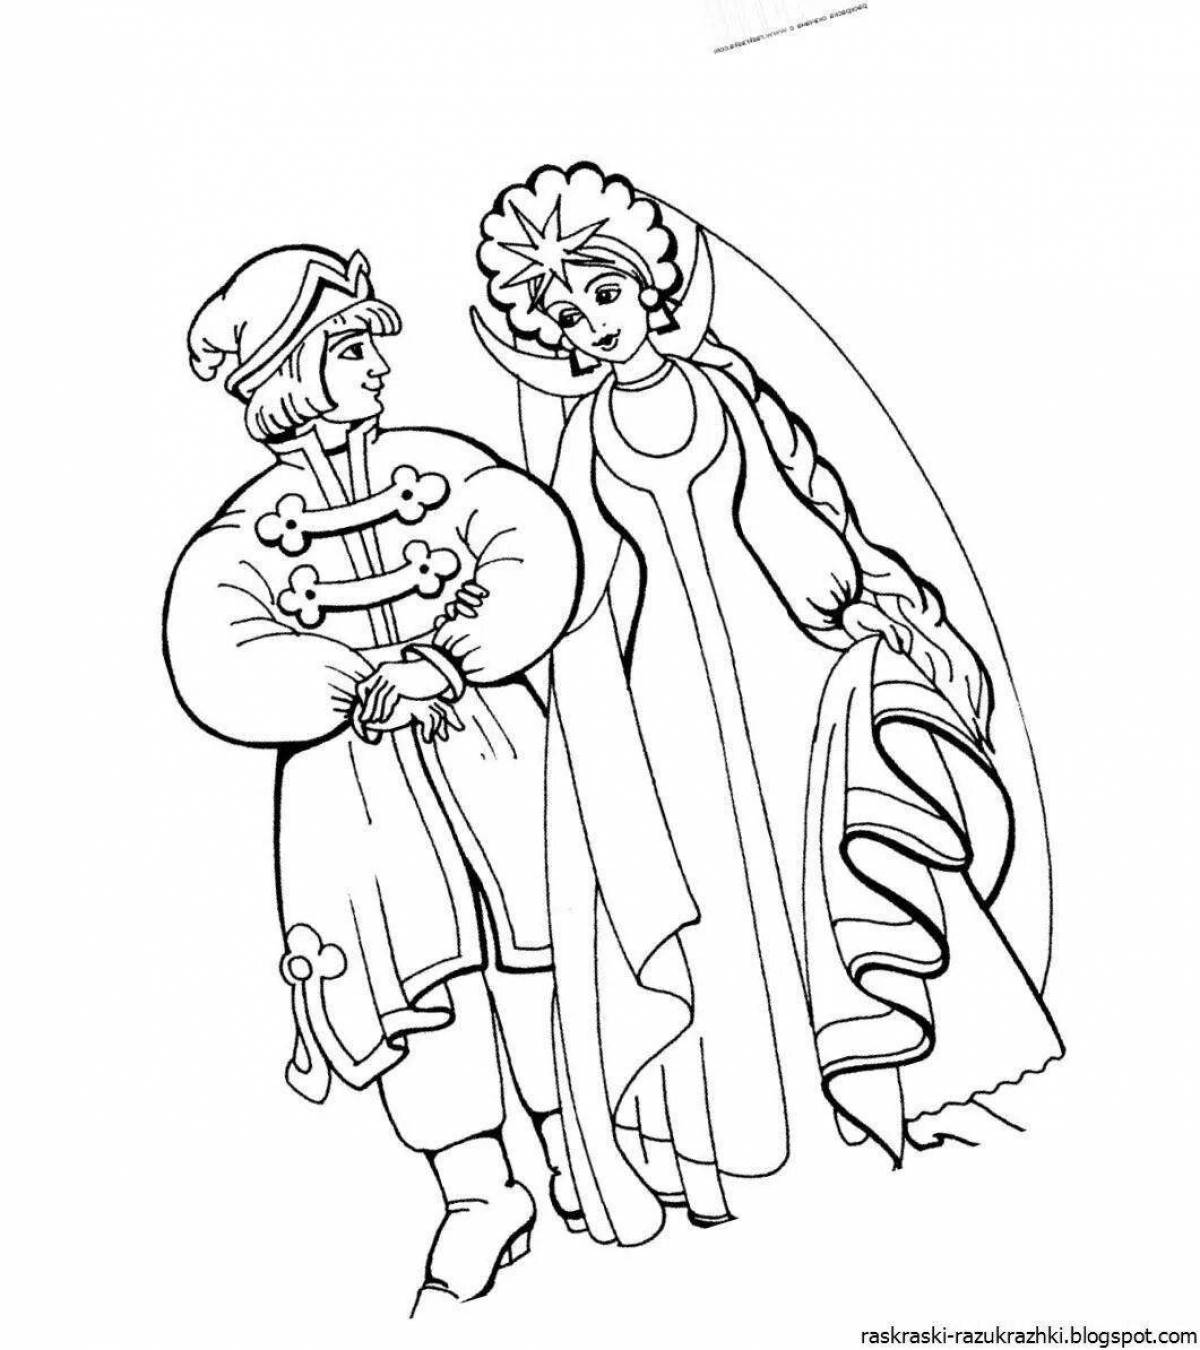 Cute coloring book based on Pushkin's works